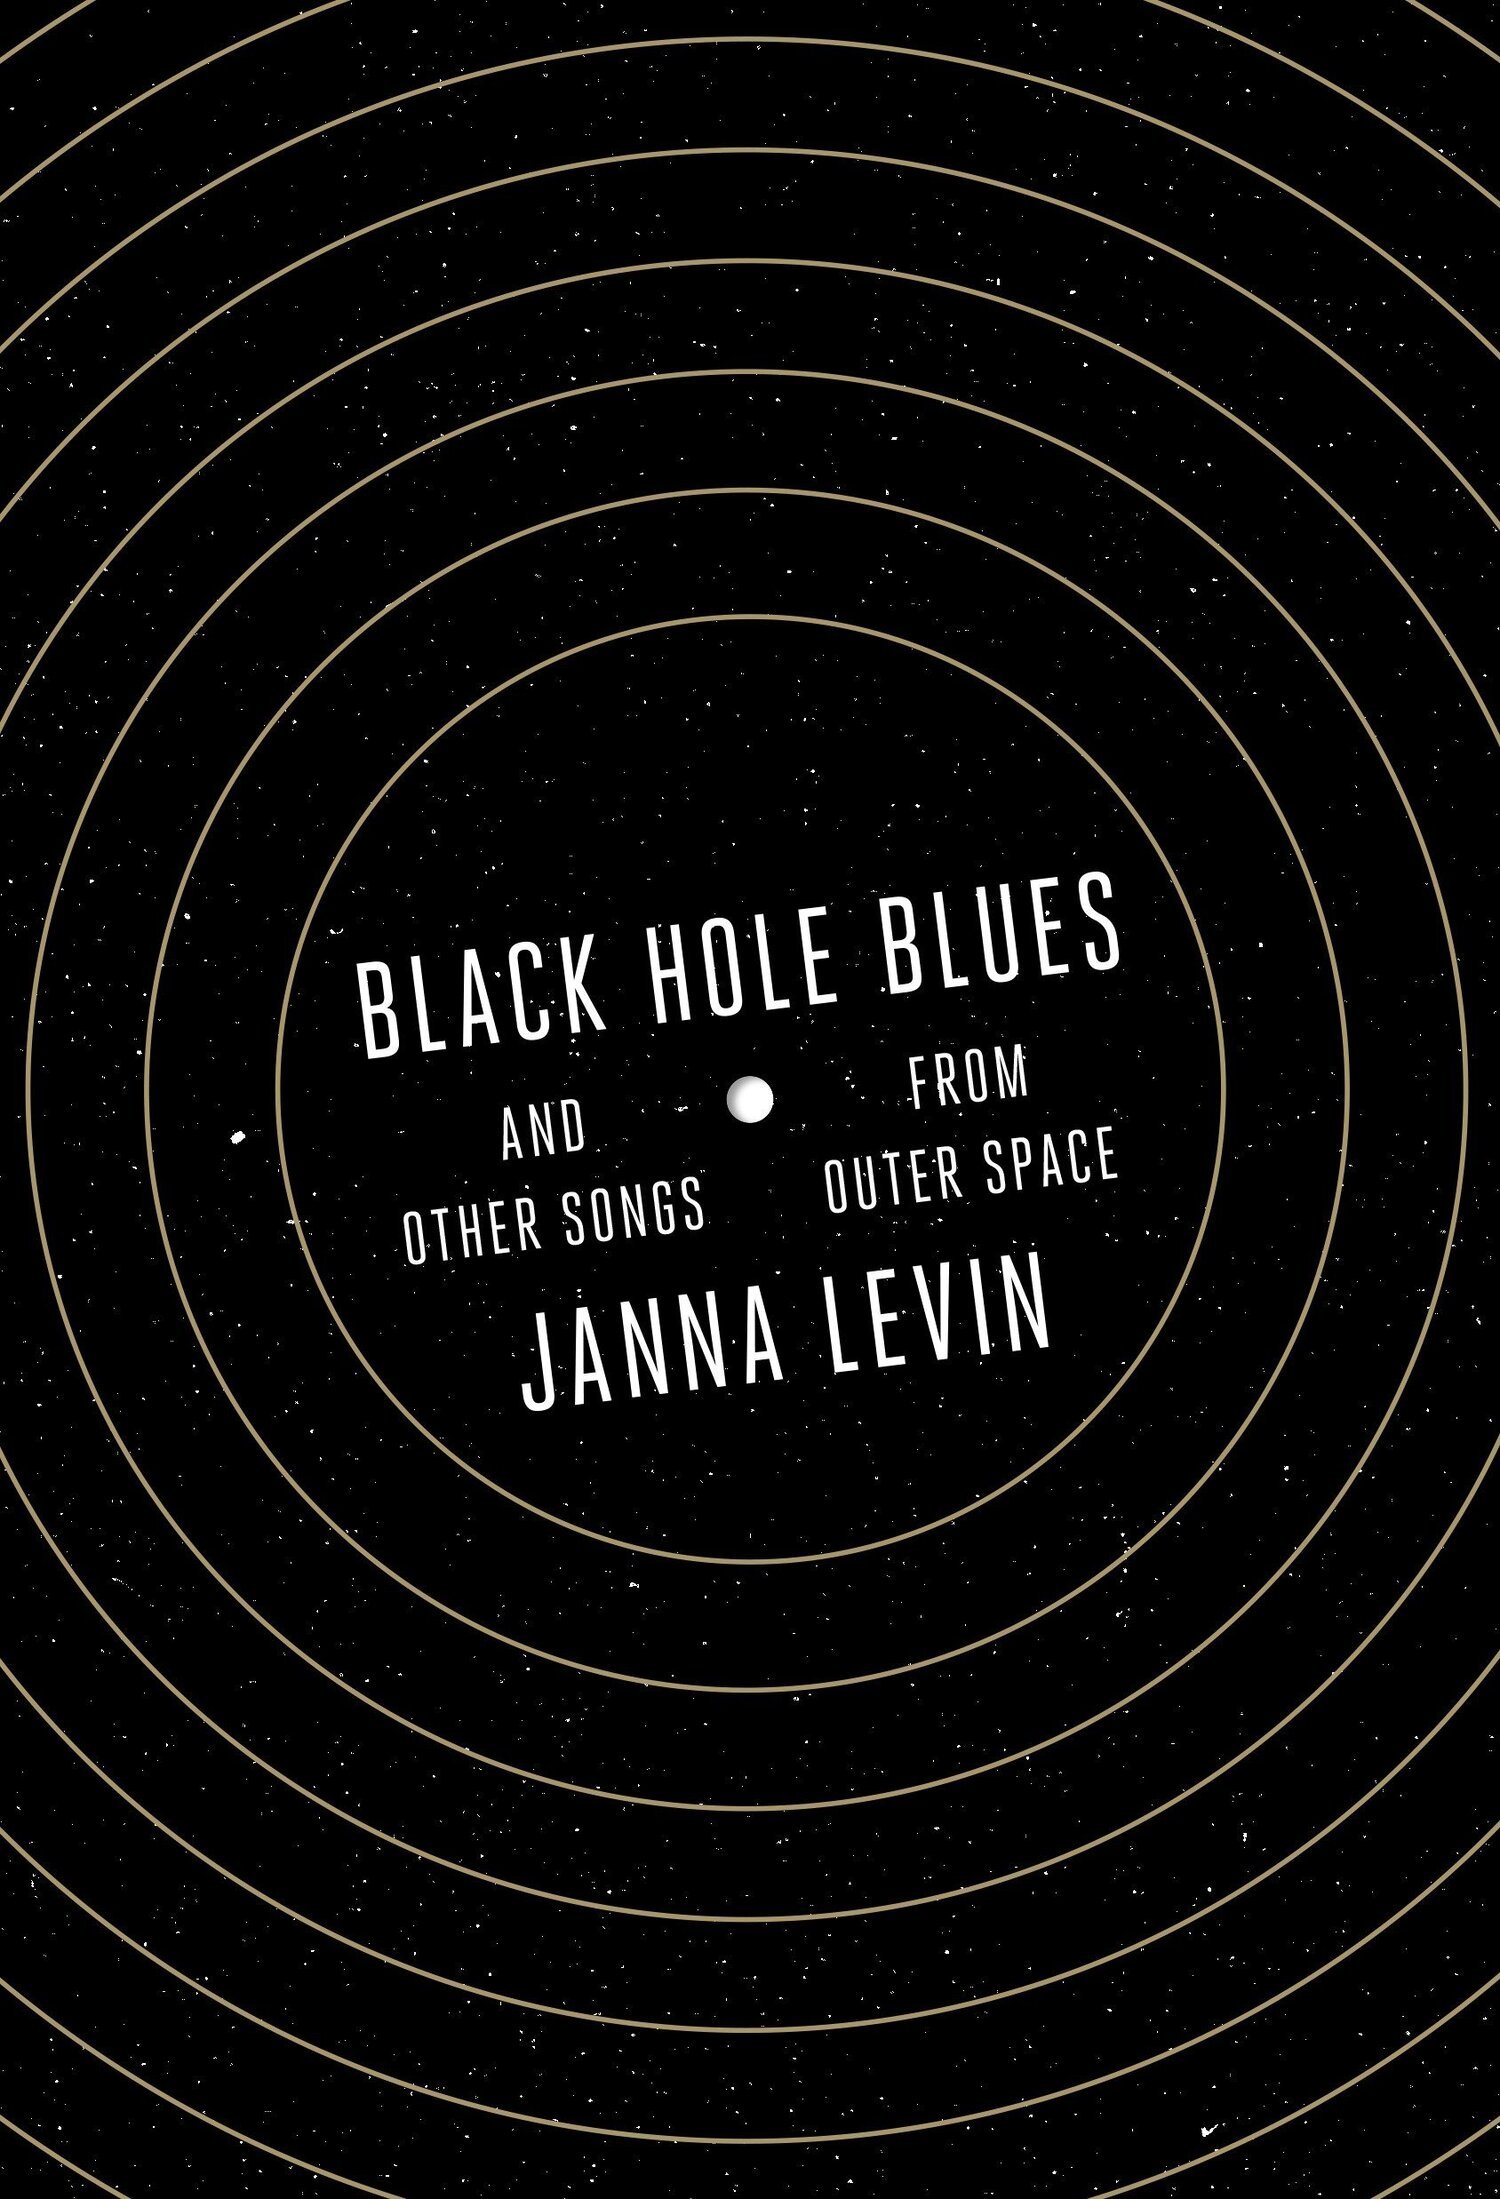 Black Hole Blues. Tips to find the perfect typefaces for your book cover